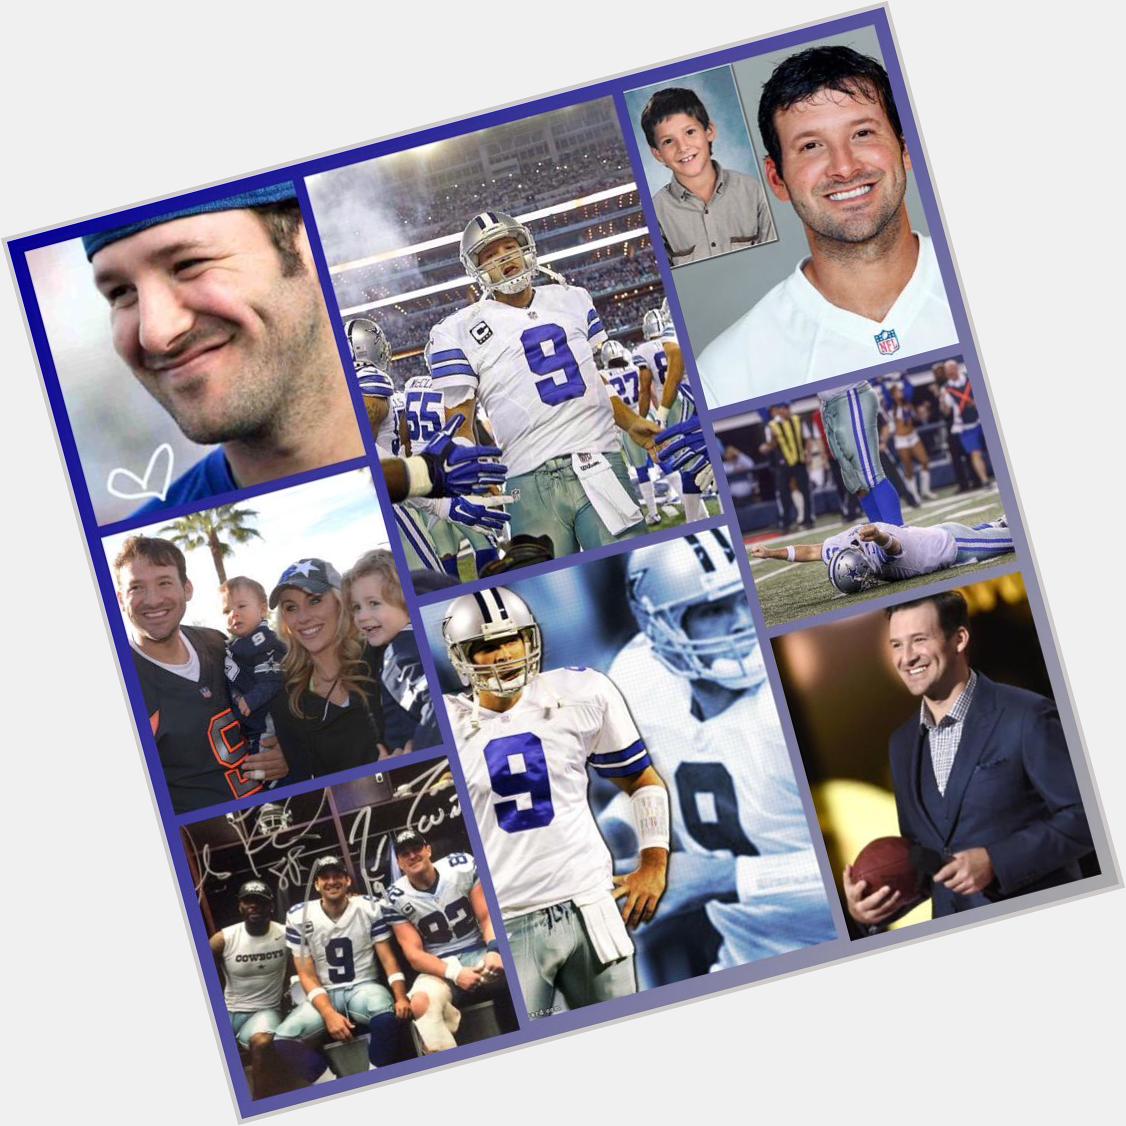  Happy Birthday to one of the Best players in the NFL and one of my favorite players my QB Tony Romo! 